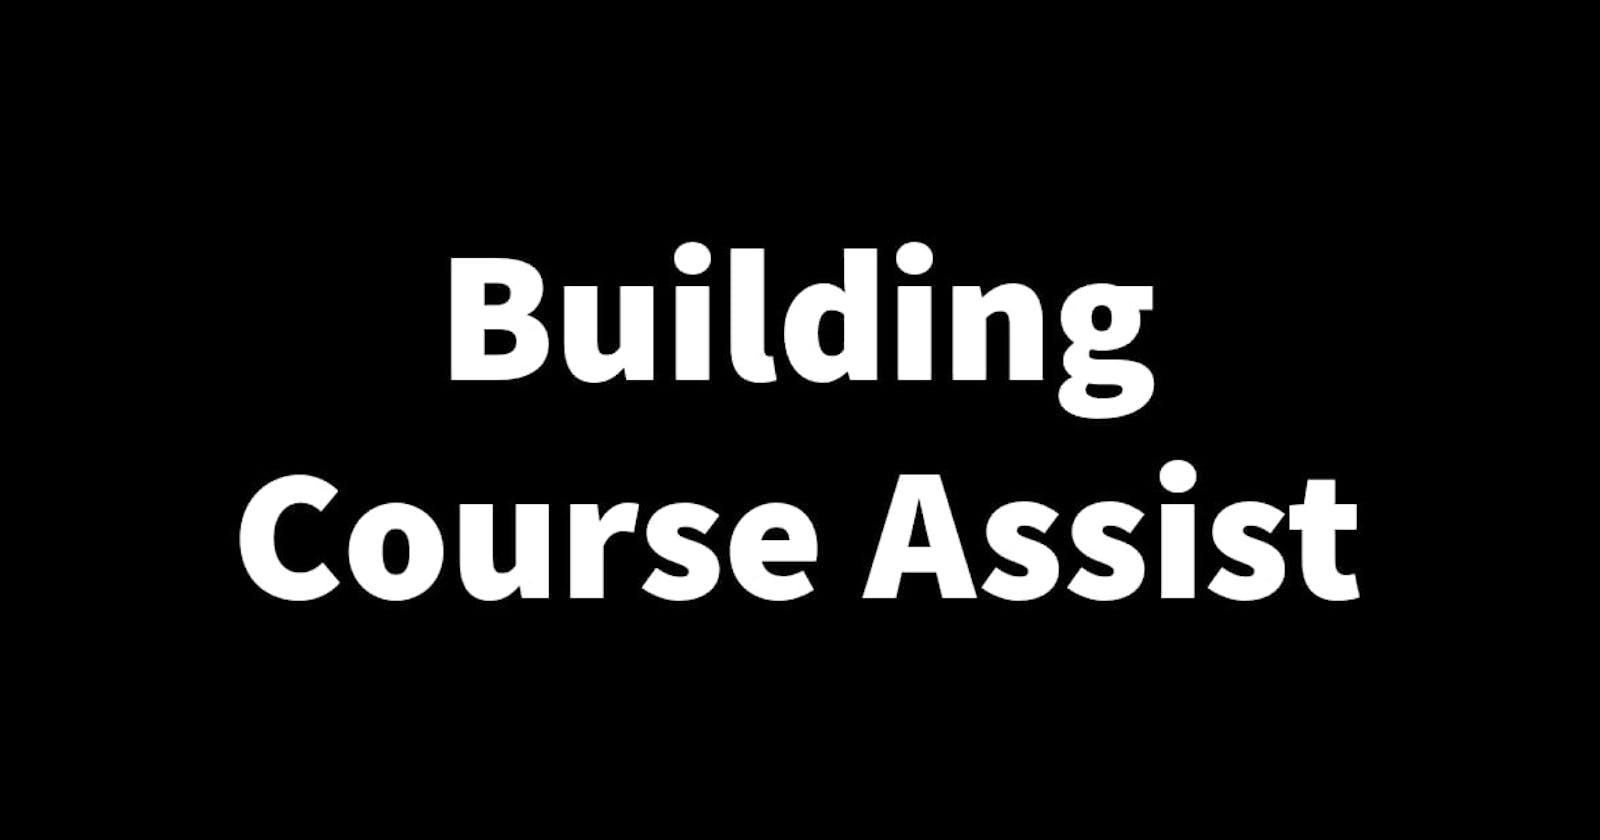 Building Course Assist Part 20: Adding some last minute bug fixes and features